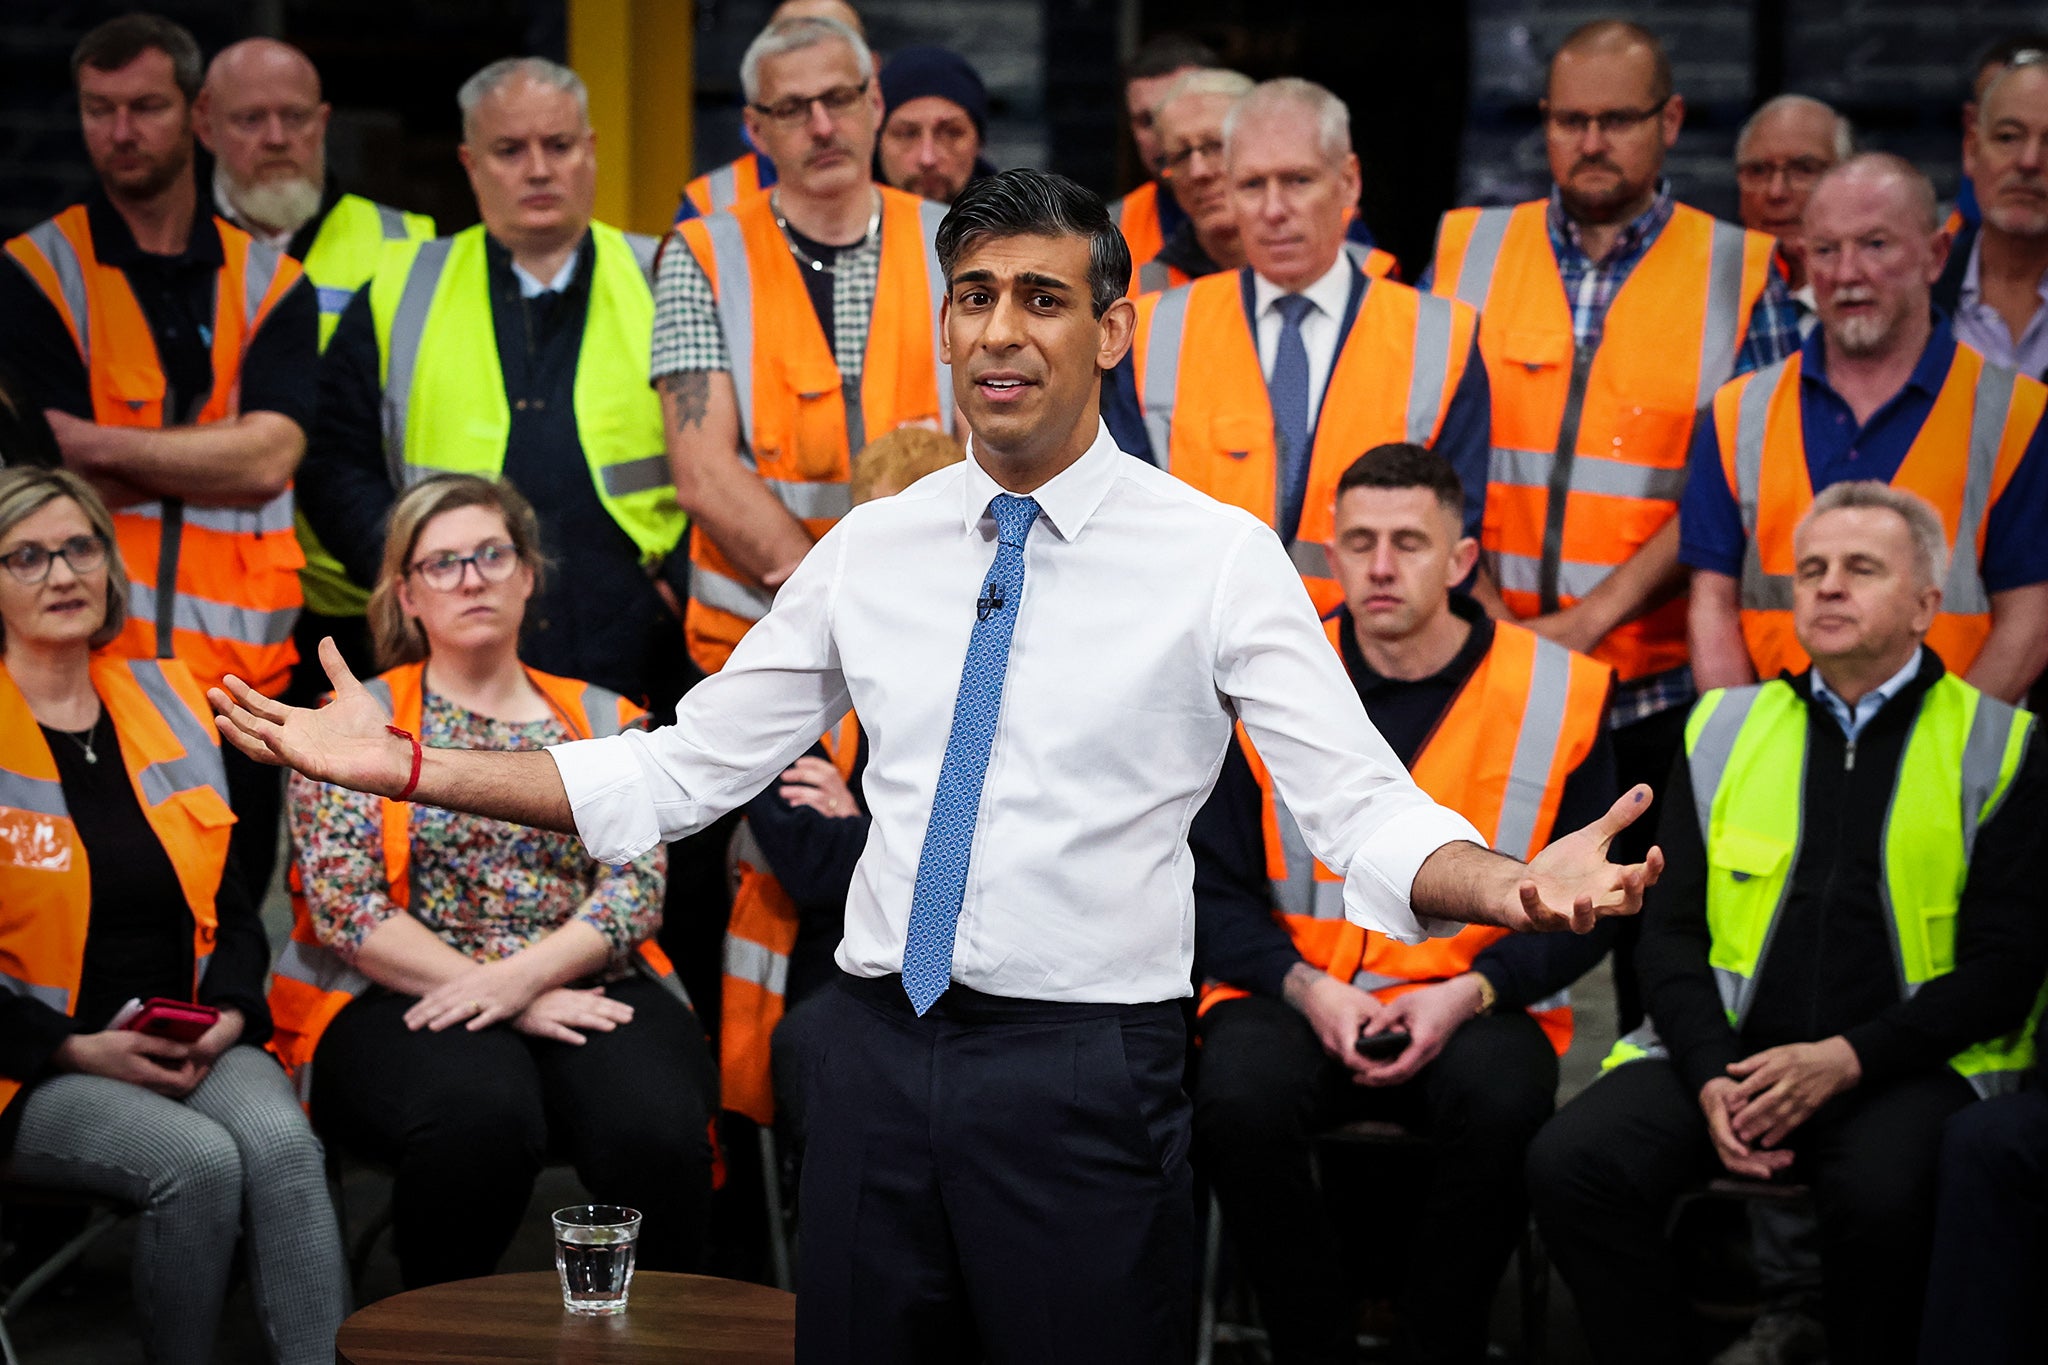 Prime Minister Rishi Sunak takes part in a Q&A with workers during a visit to West William Distribution in Ilkeston, Derbyshire